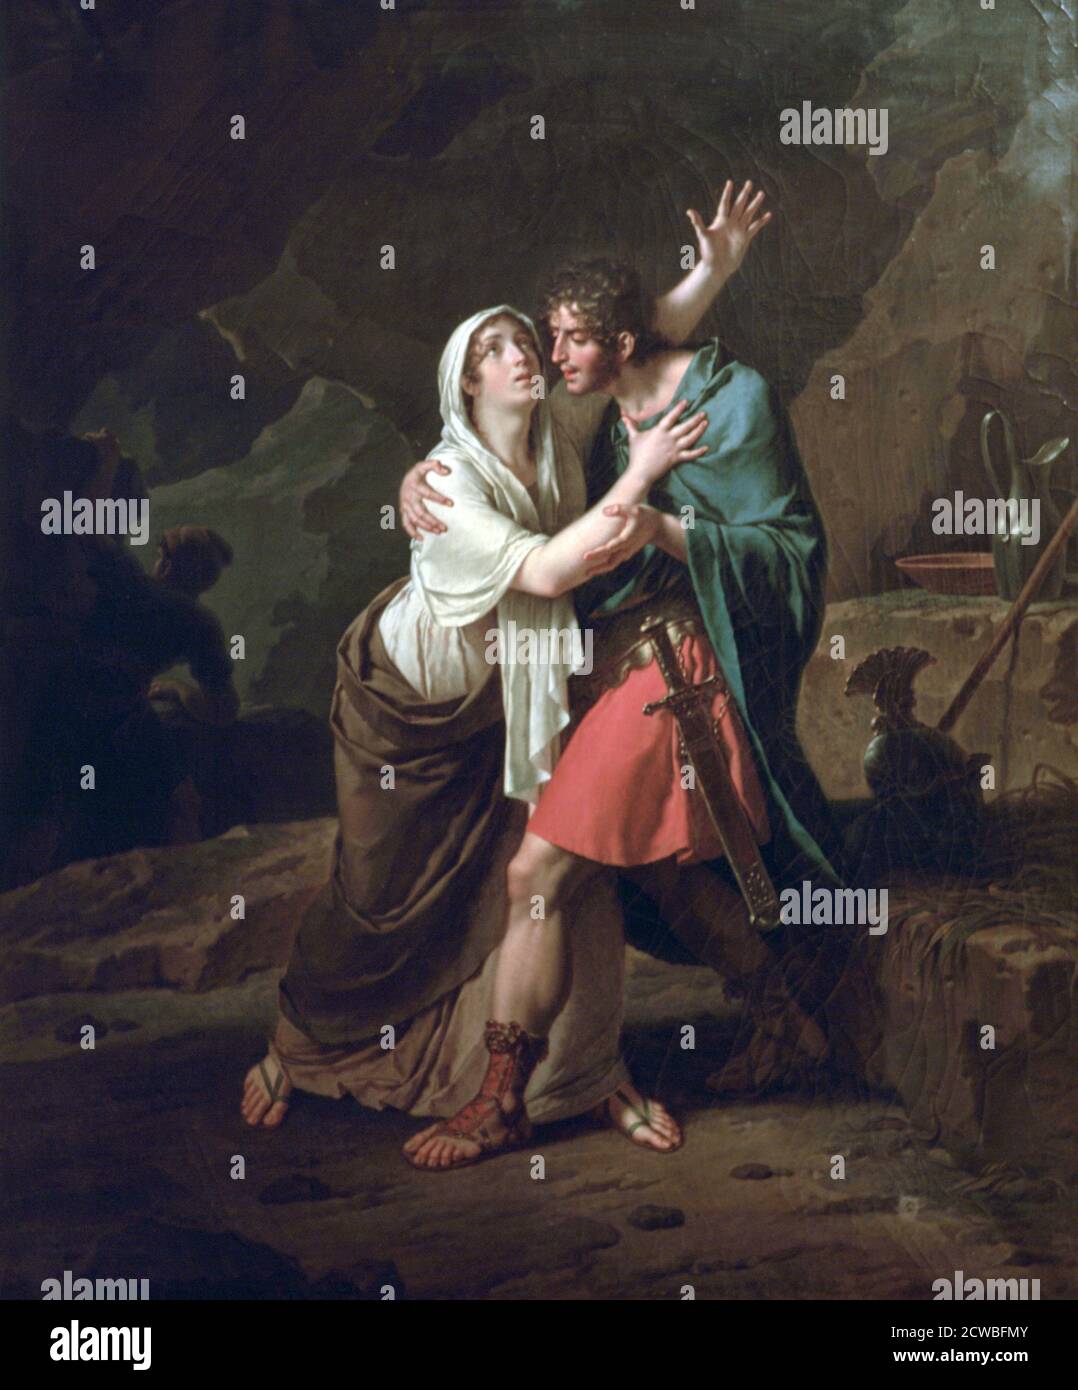 Eponine et Sabinus', 1802. Artist: Nicolas Andre Monsiau. Nicolas-Andre Monsiau (1754-1837) was a French history painter and a refined draughtsman who turned to book illustration. Stock Photo